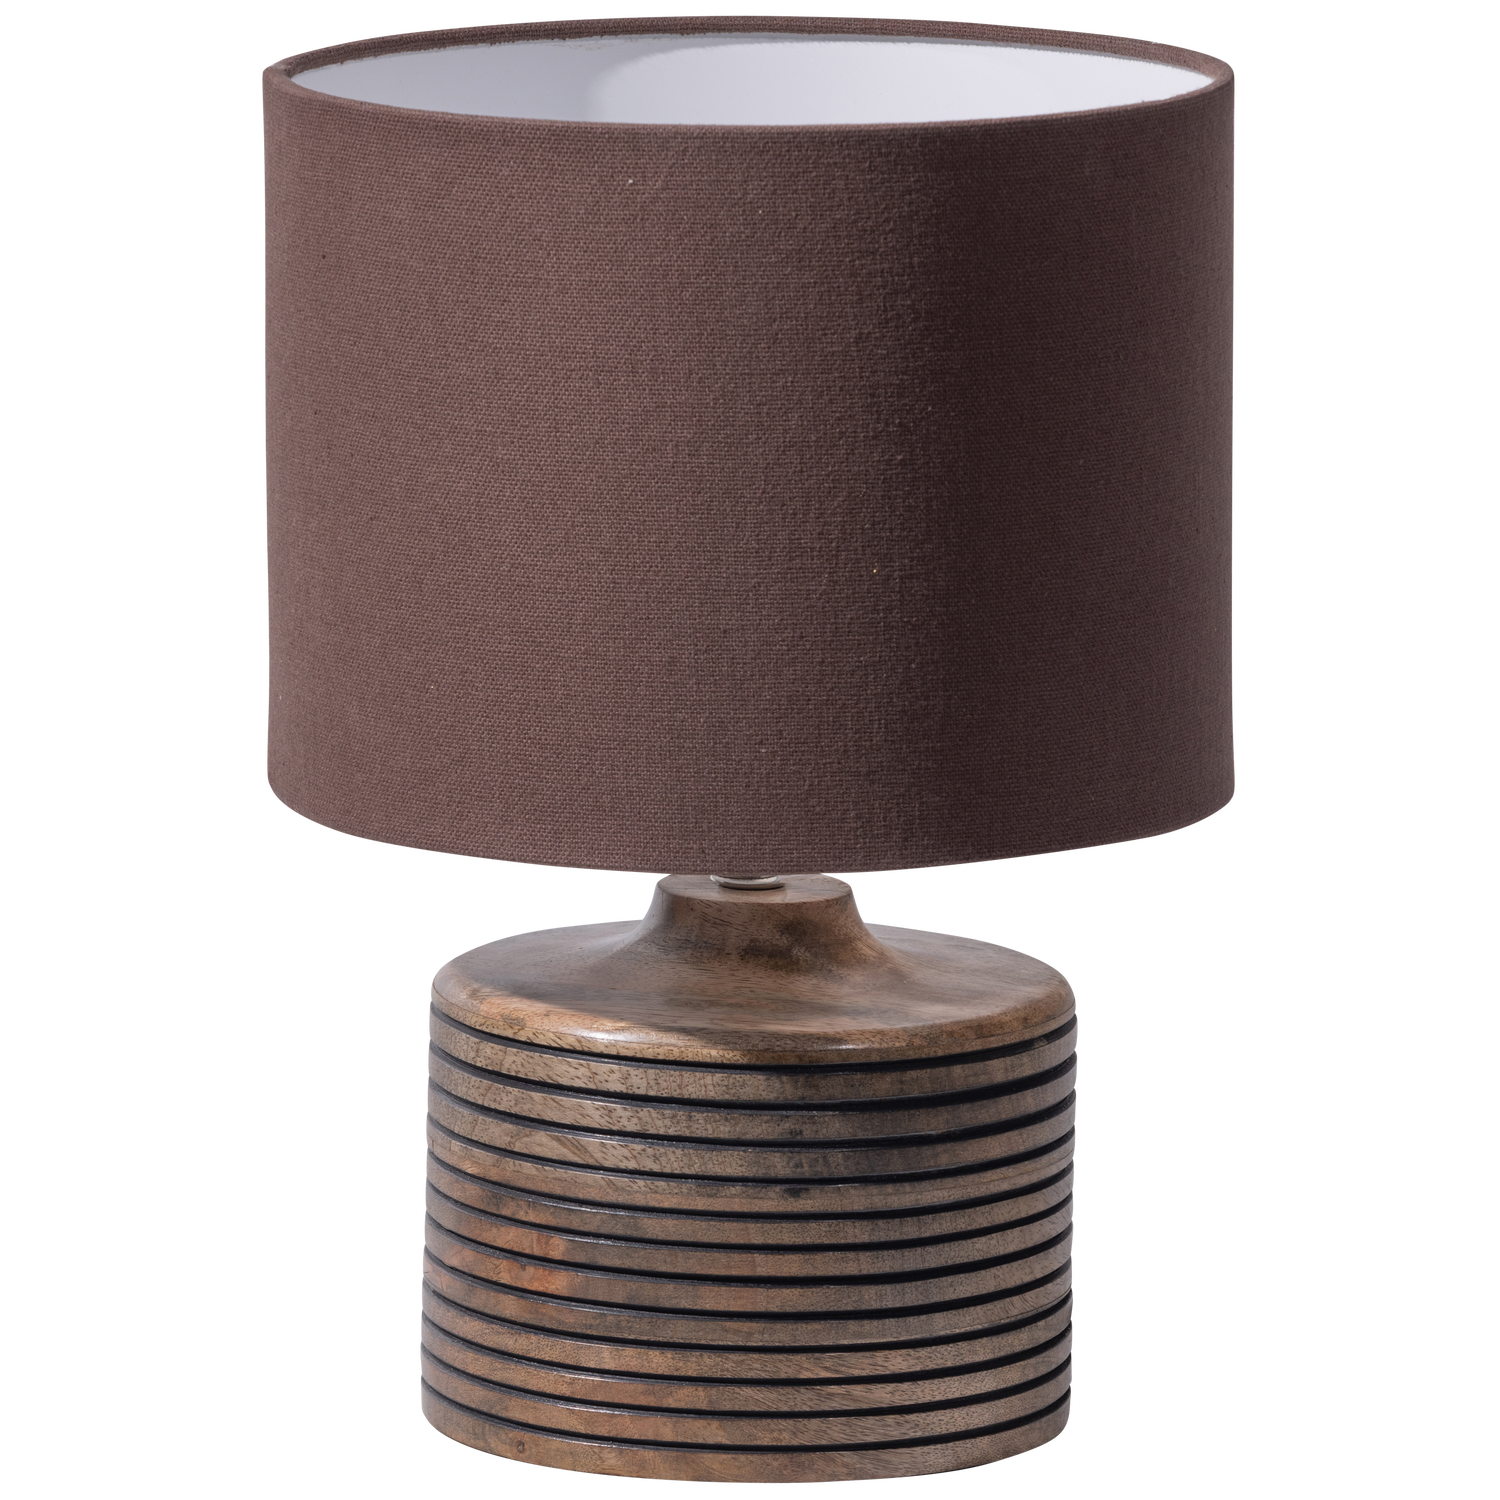 MENZO TABLE LAMP WITH CARVING WOOD WARM BROWN